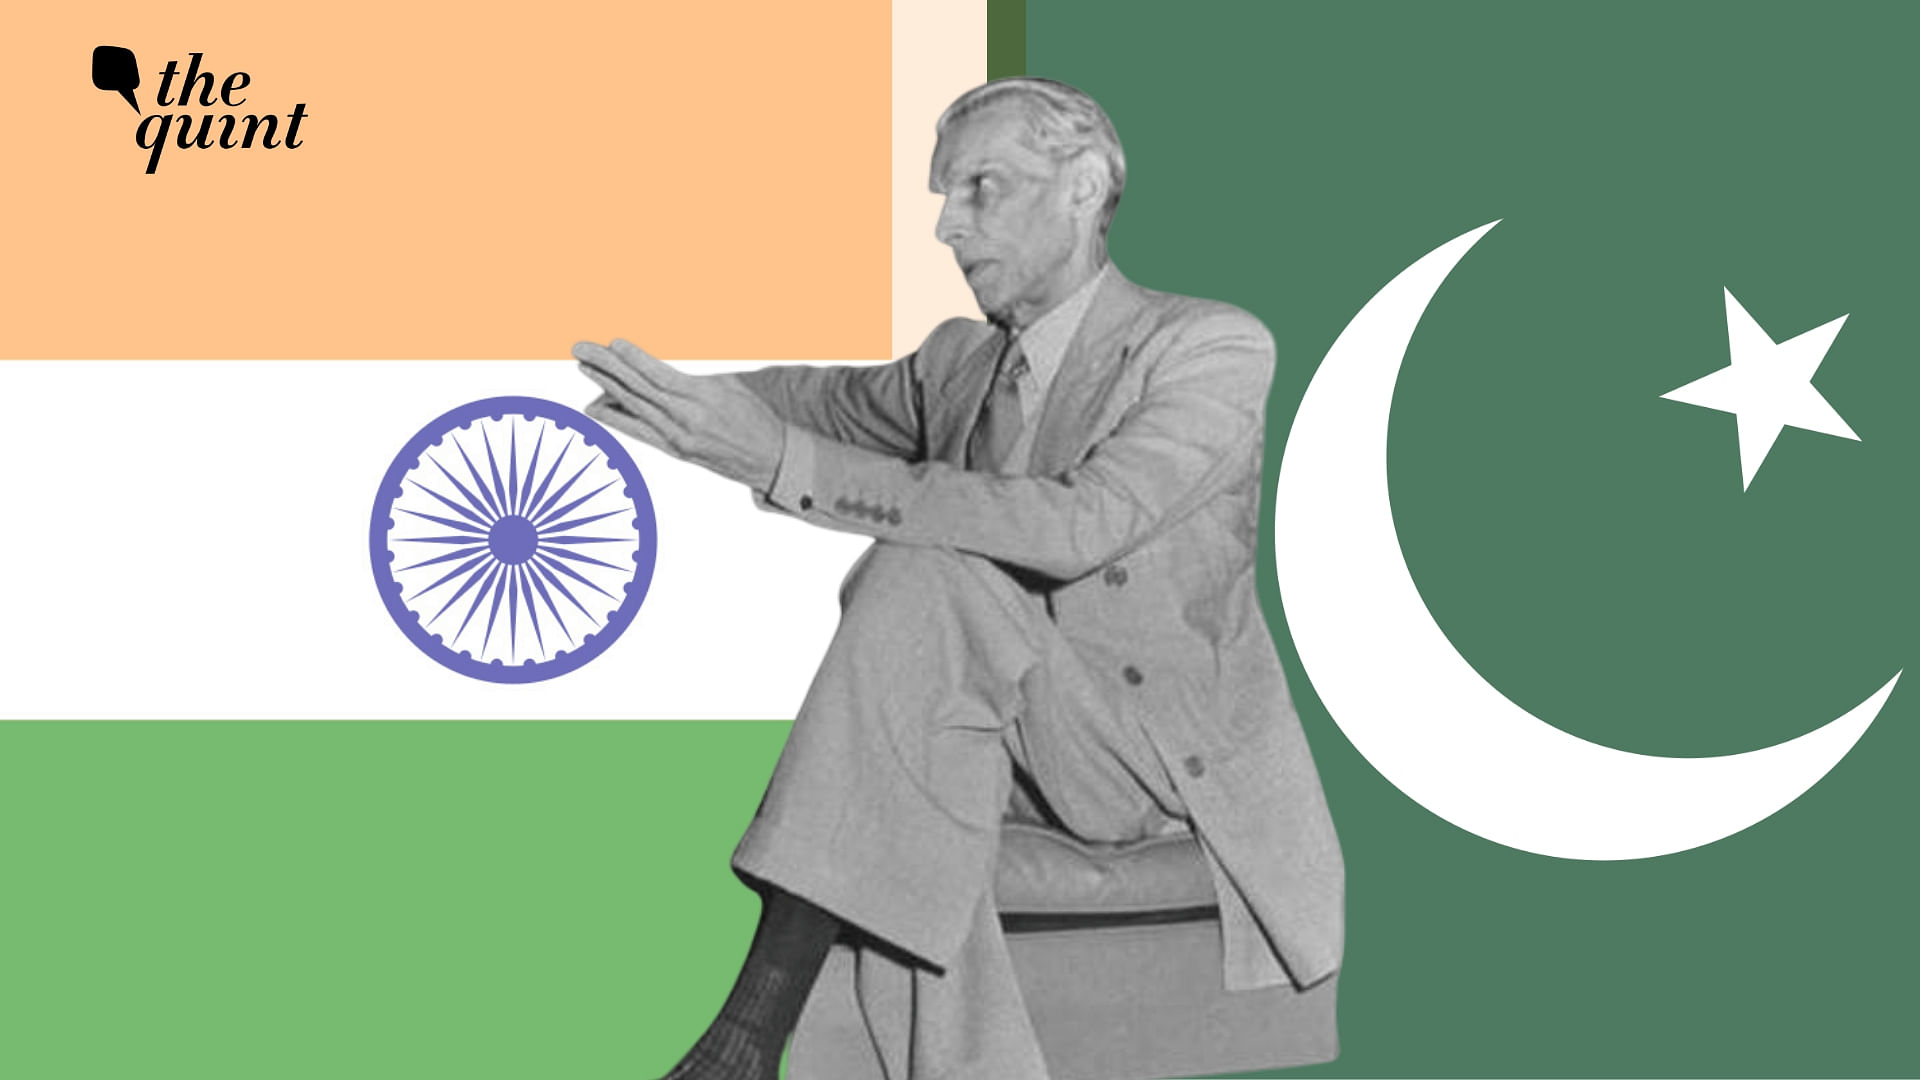 Image of Mohd Ali Jinnah and India and Pakistan’s flags, used for representational purposes.